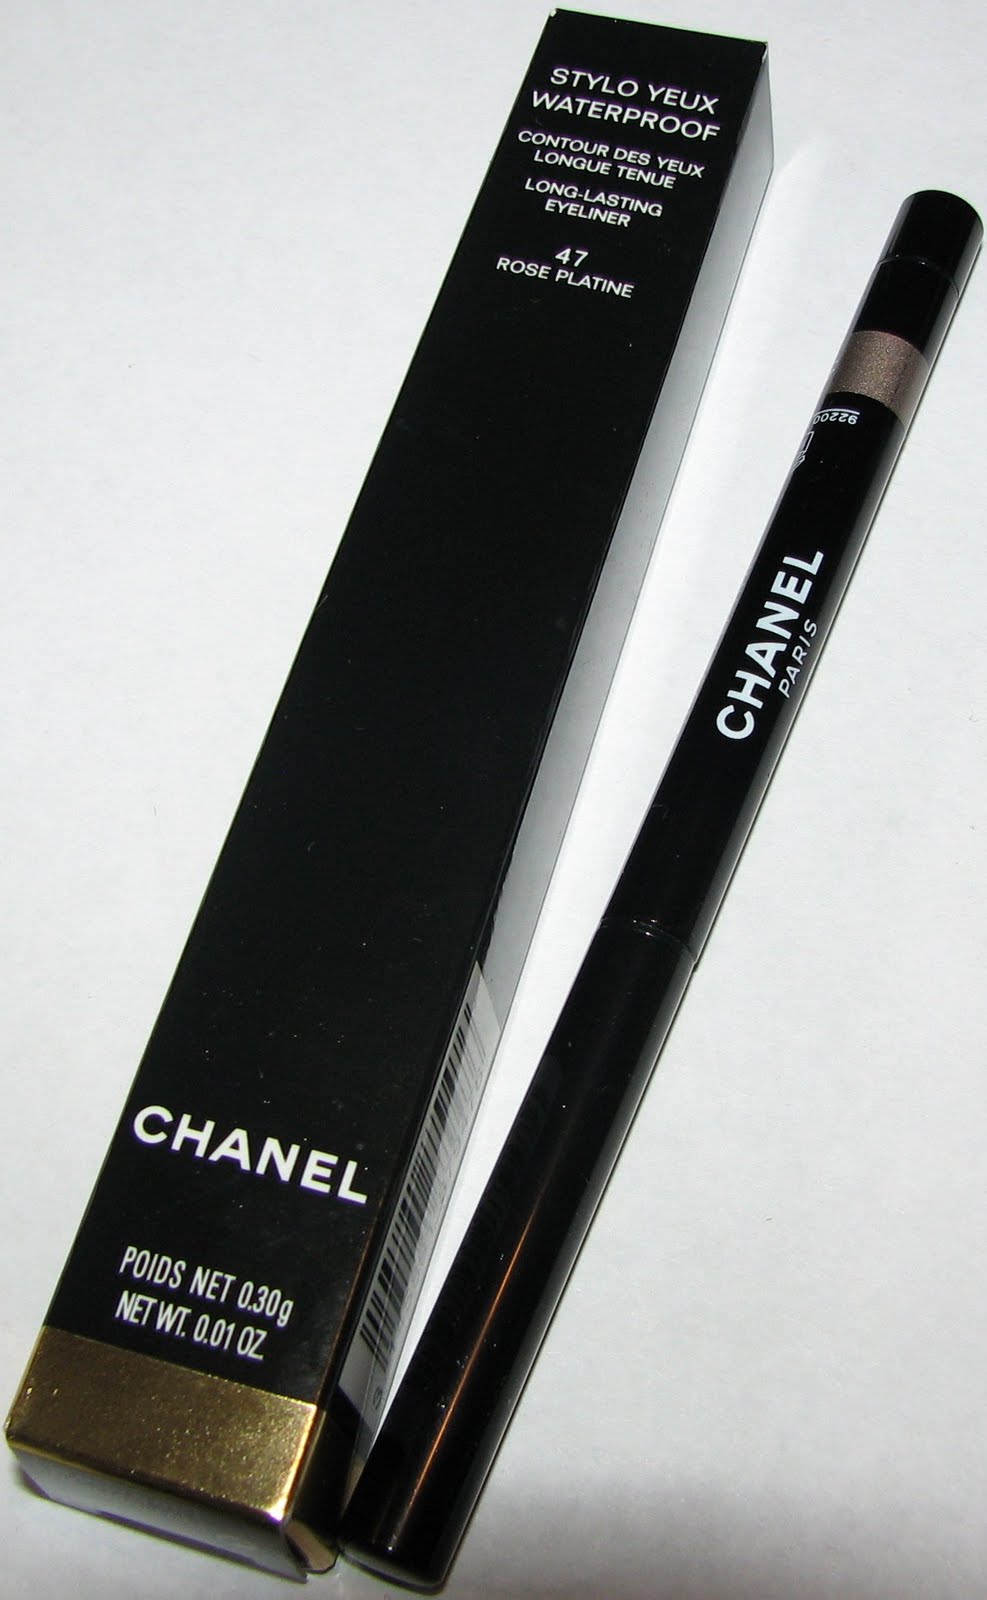 Chanel ROSE PLATINE (47) Stylo Yeux Waterproof Eyeliner Swatches